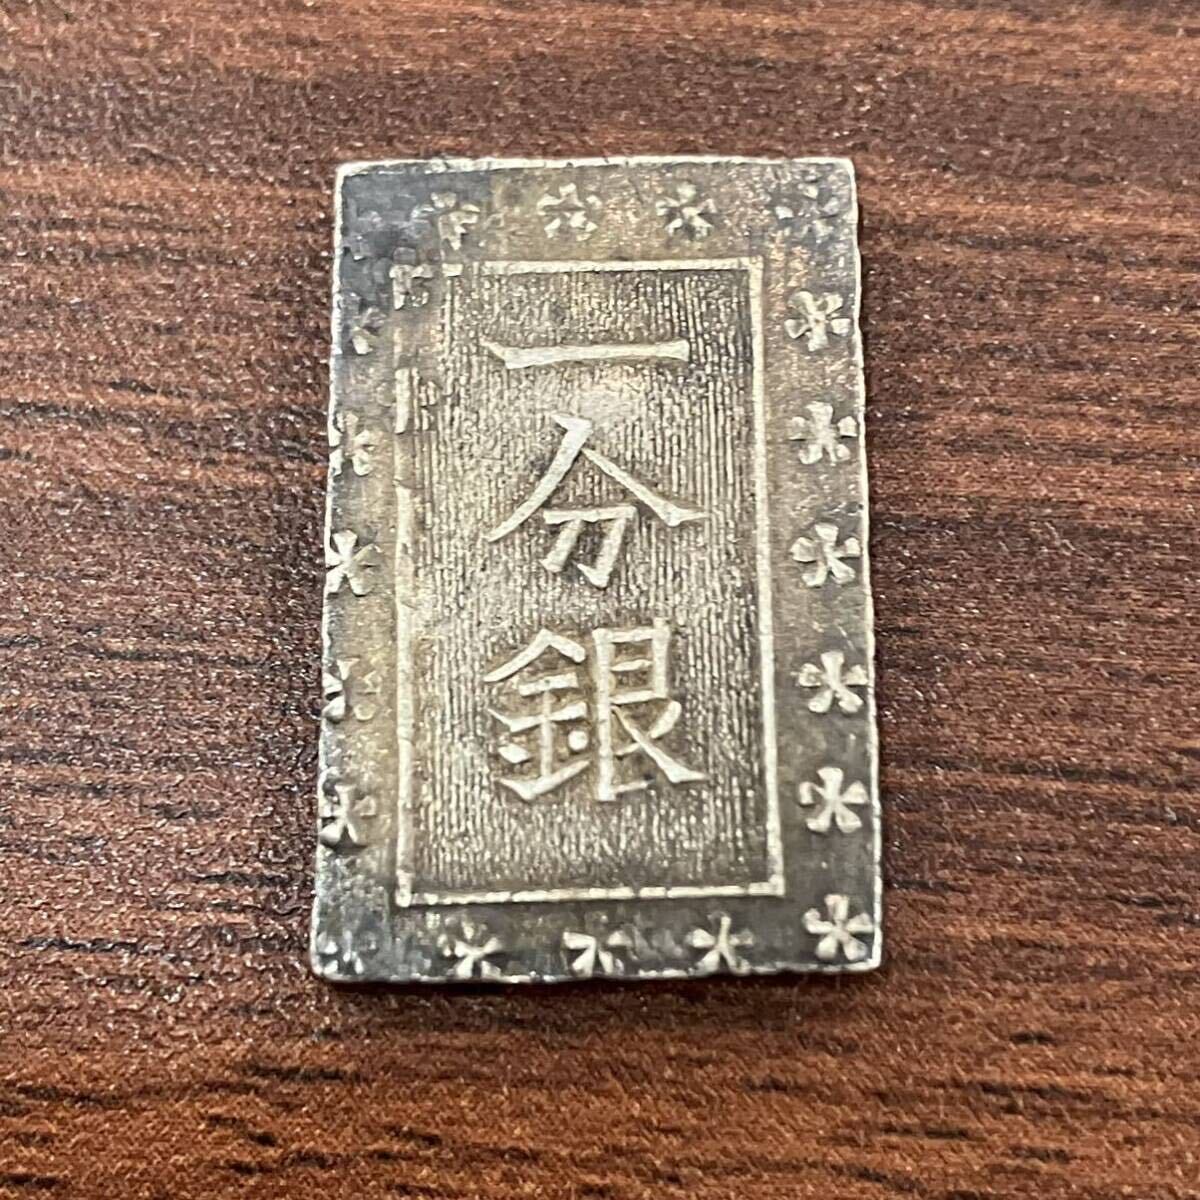 [TF0515] Japan old coin one minute silver 1 sheets approximately 8.77g scratch equipped dirt equipped collection Ginza .. retro antique silver coin money Edo era?